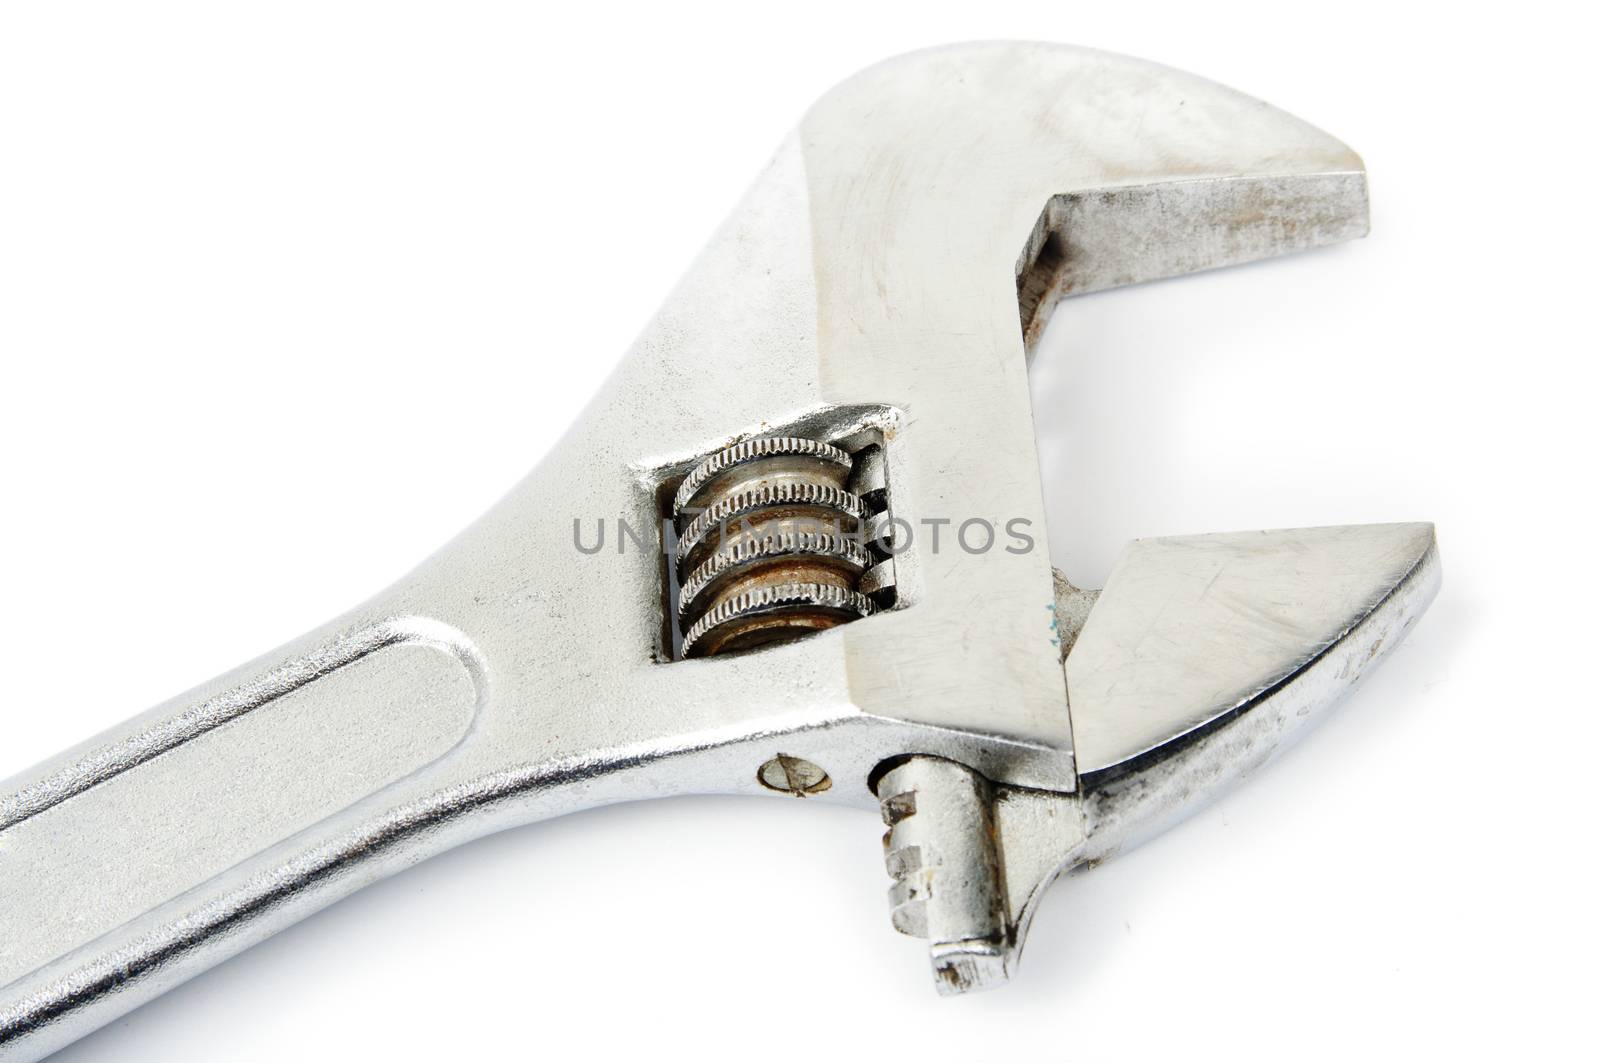 An image of adjustable wrench on white